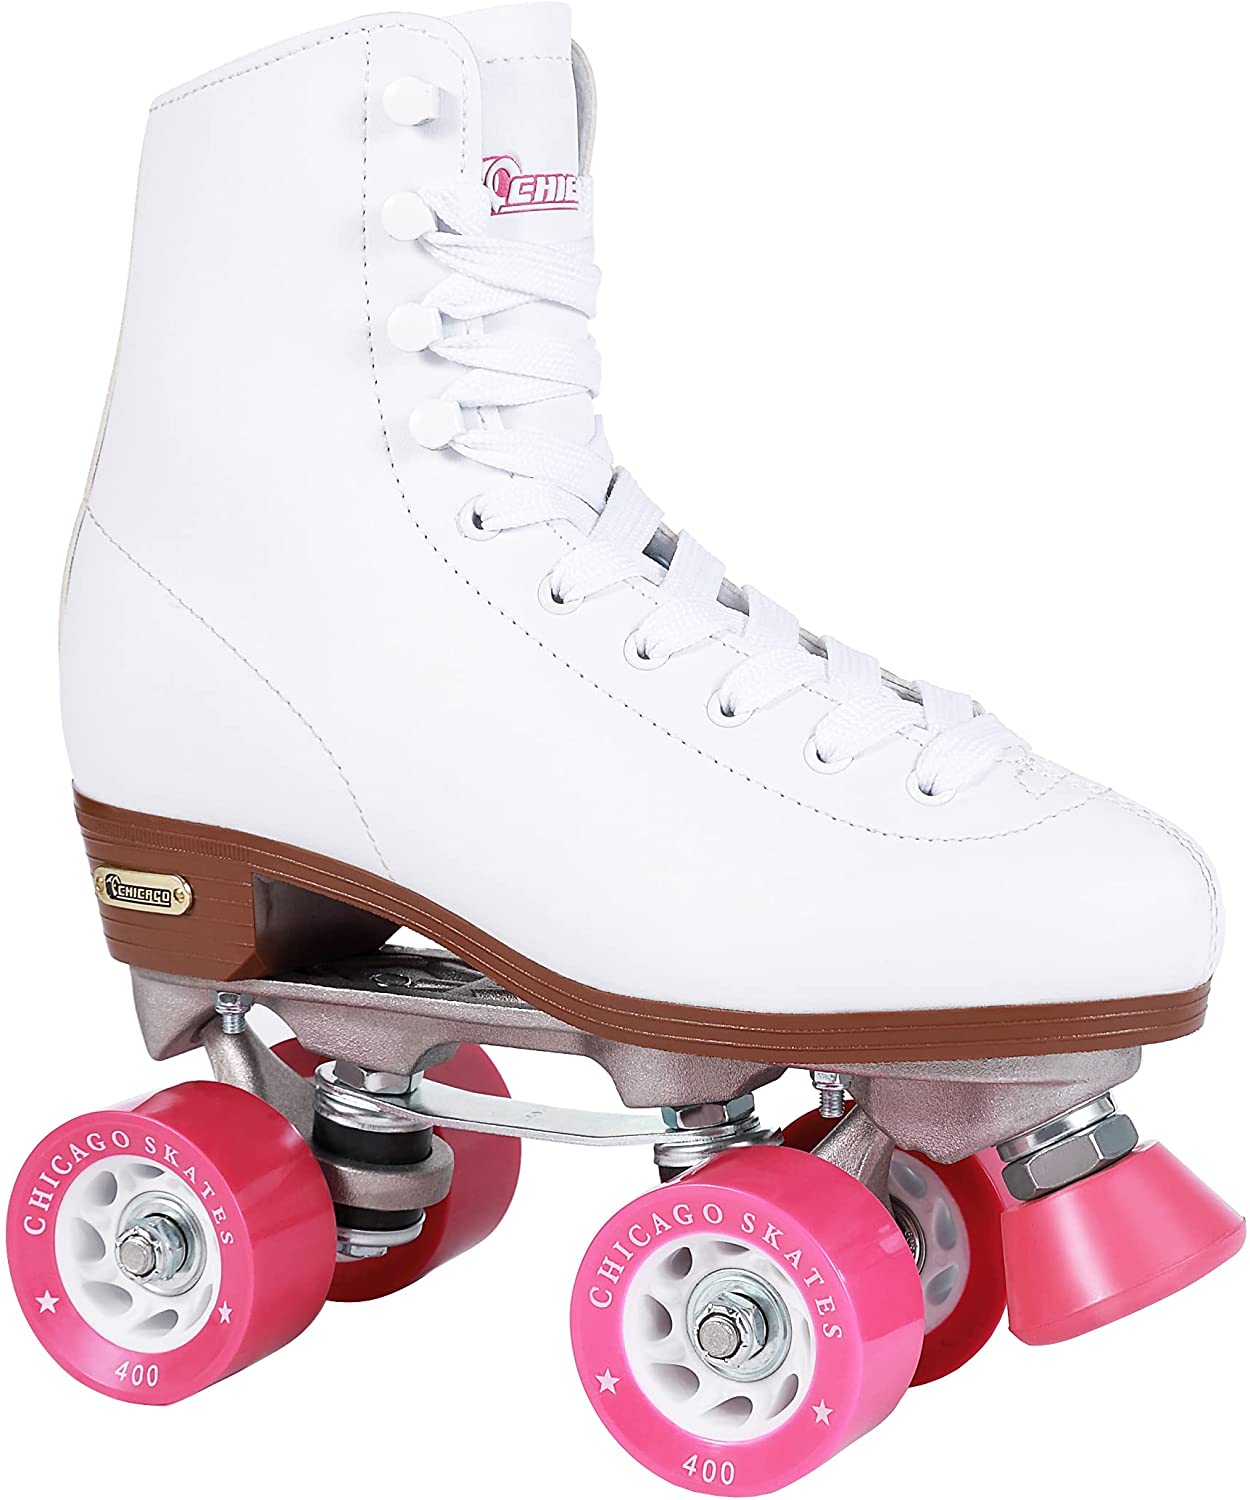 Review of CHICAGO Women's Classic Roller Skates